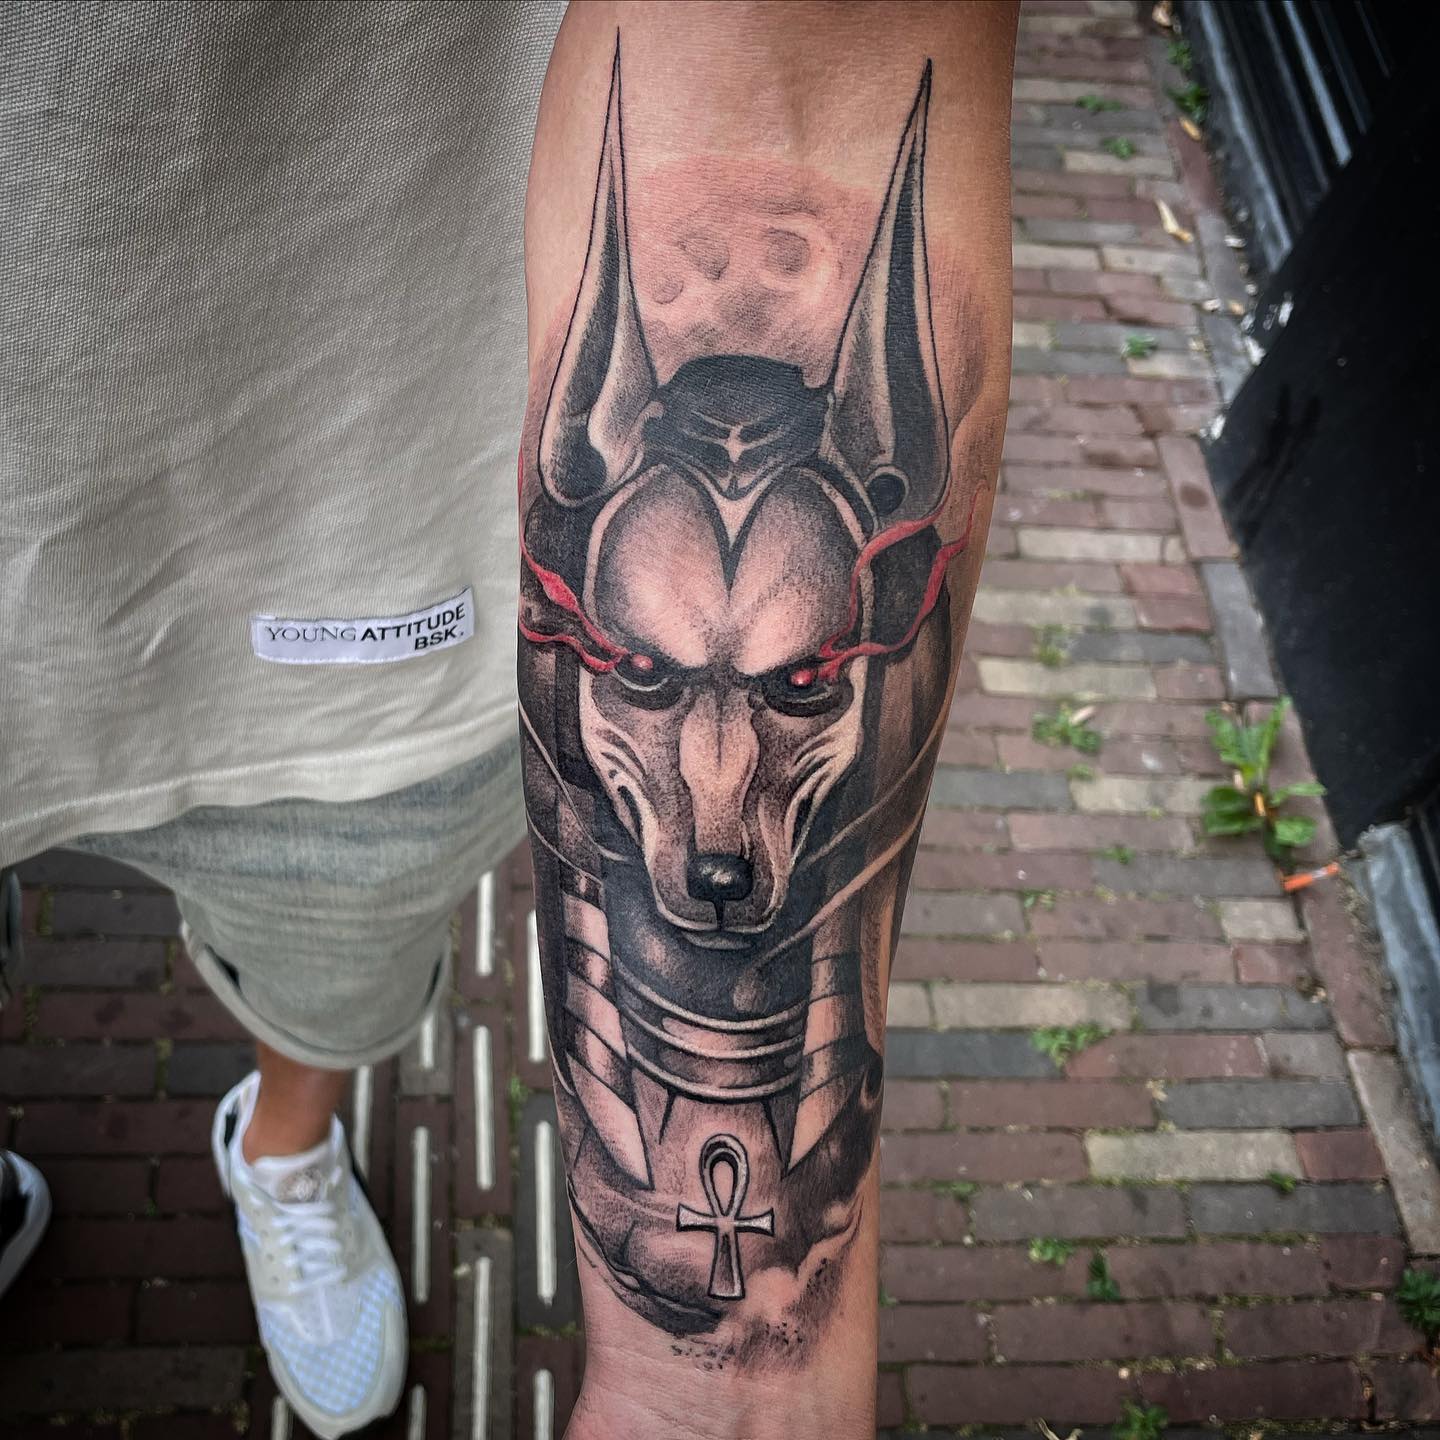 Red-Eyed Anubis is an another form that will look gorgeous on your sleeve.